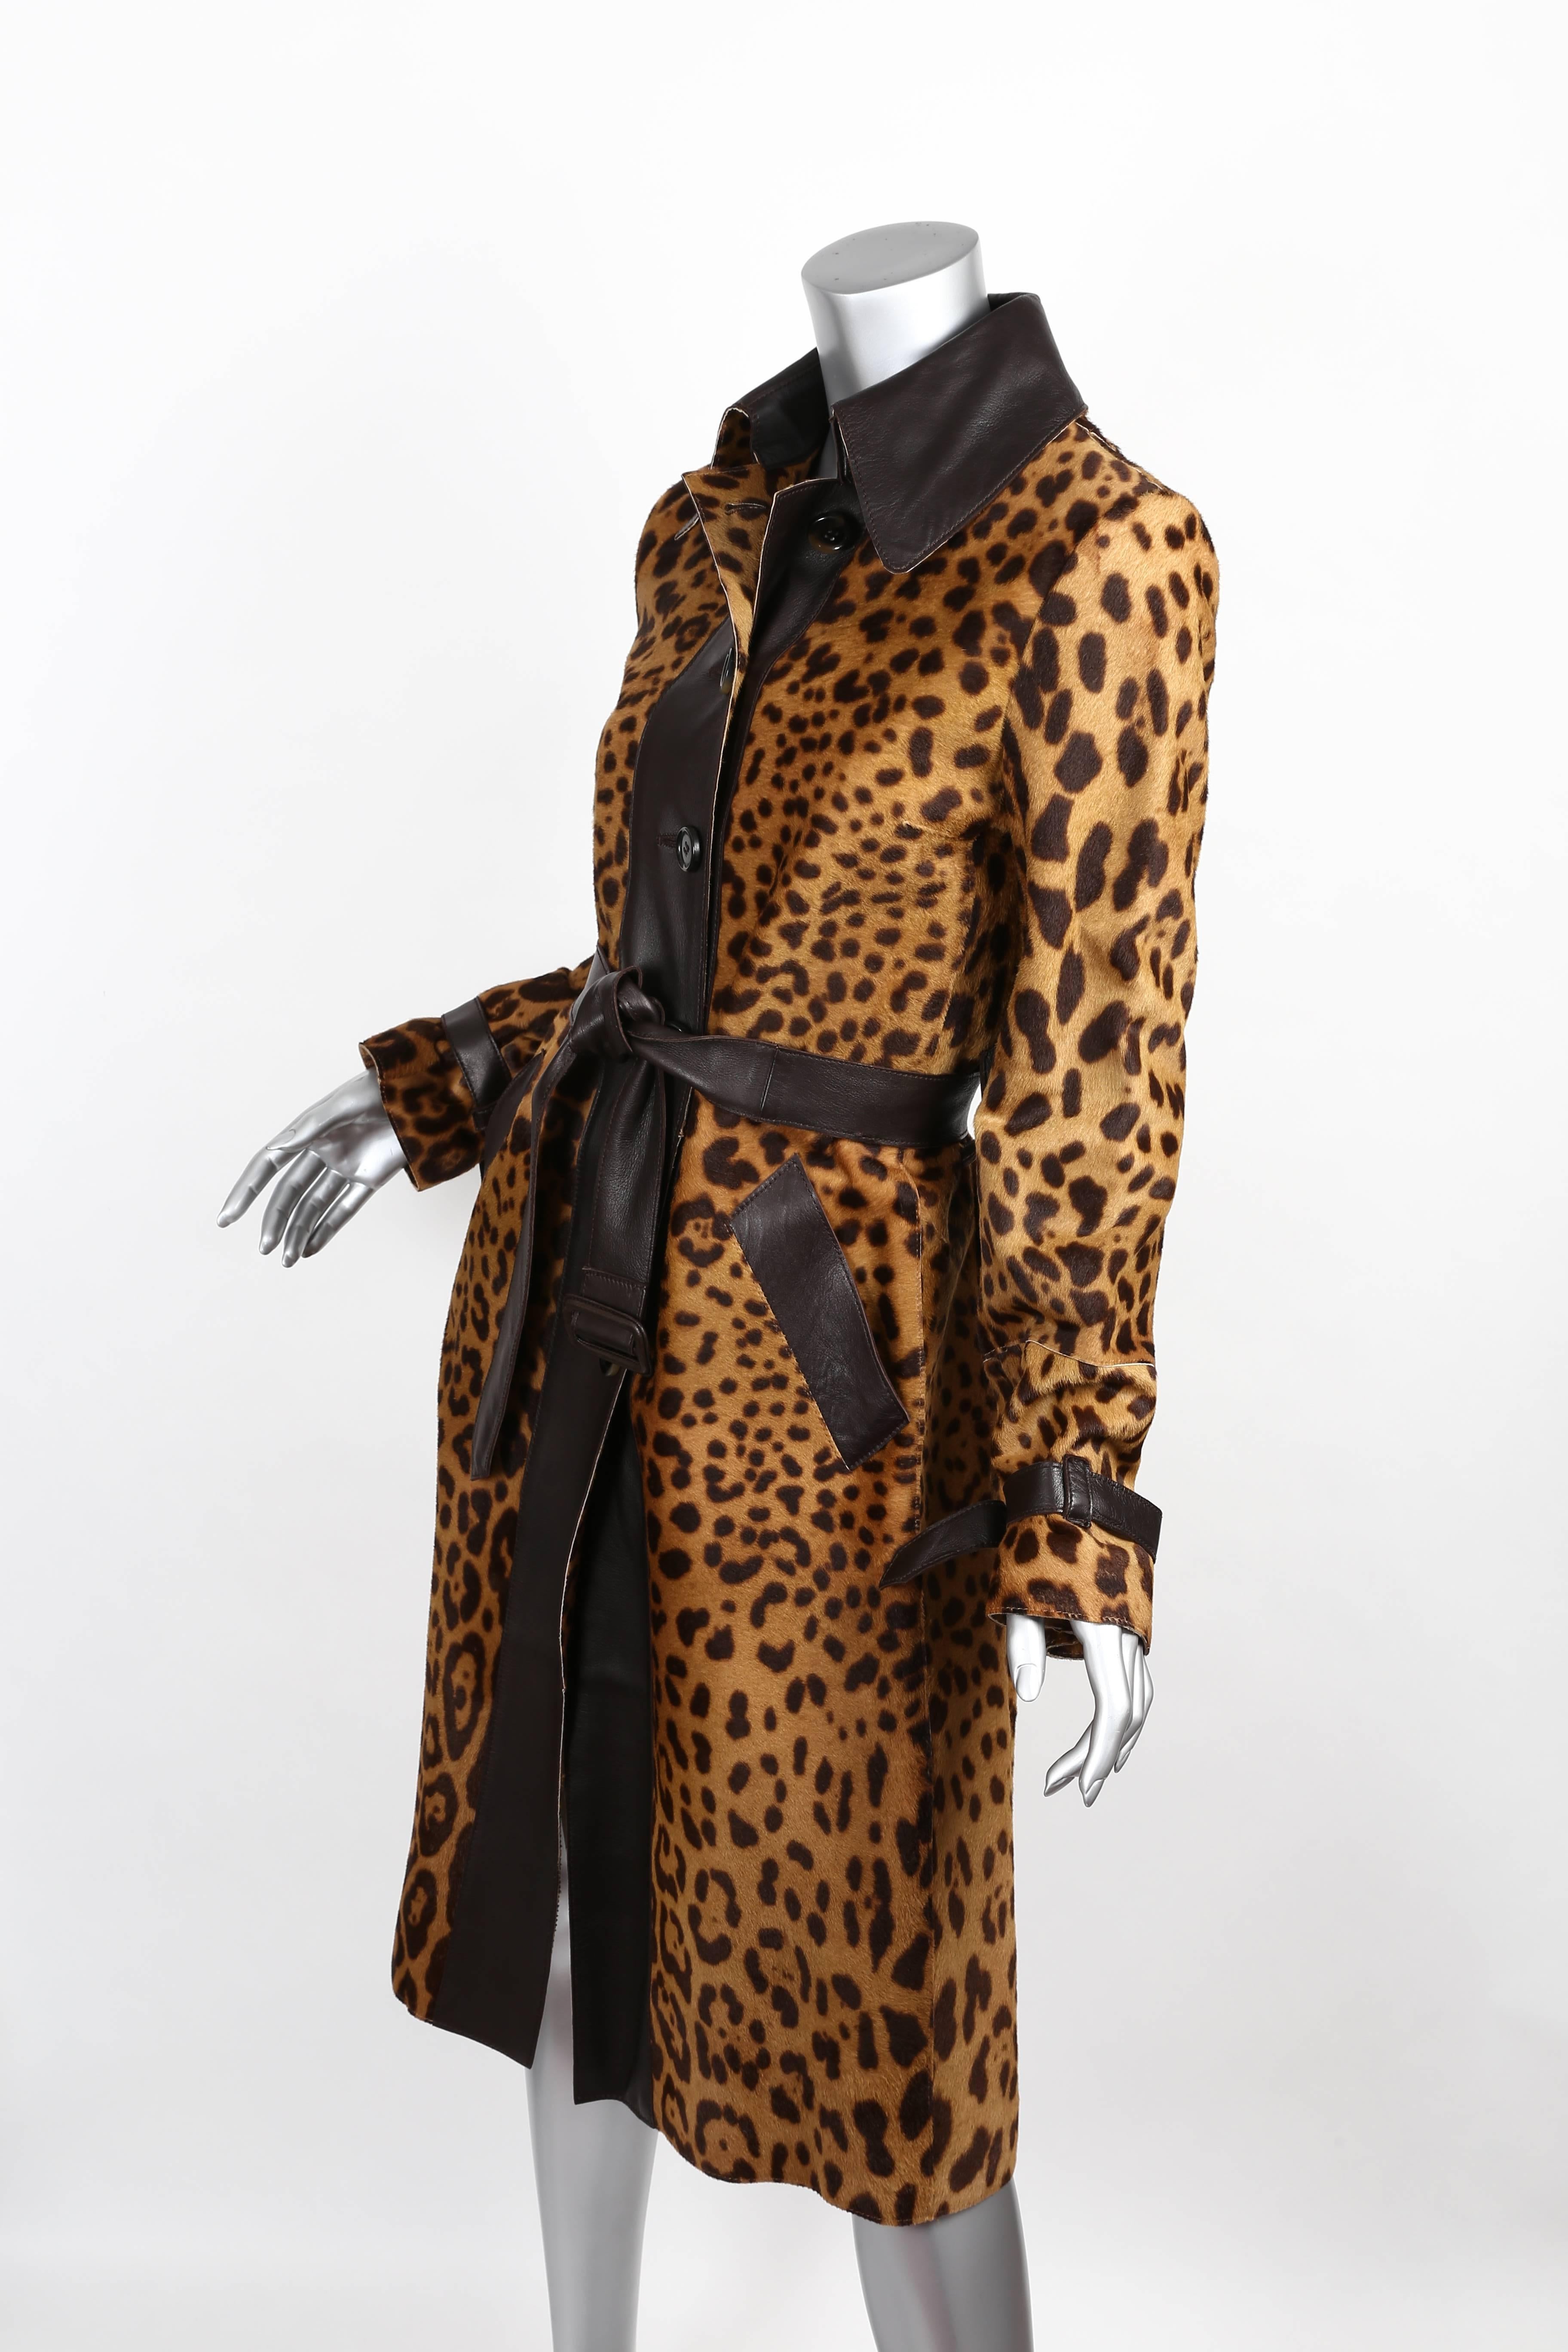 Stunning Dolce & Gabbana leopard print pony skin coat with wide brown leather collar, belt and trim. 
Tortoise shell six button closure. 
Silk leopard print lining. 
Condition is excellent.